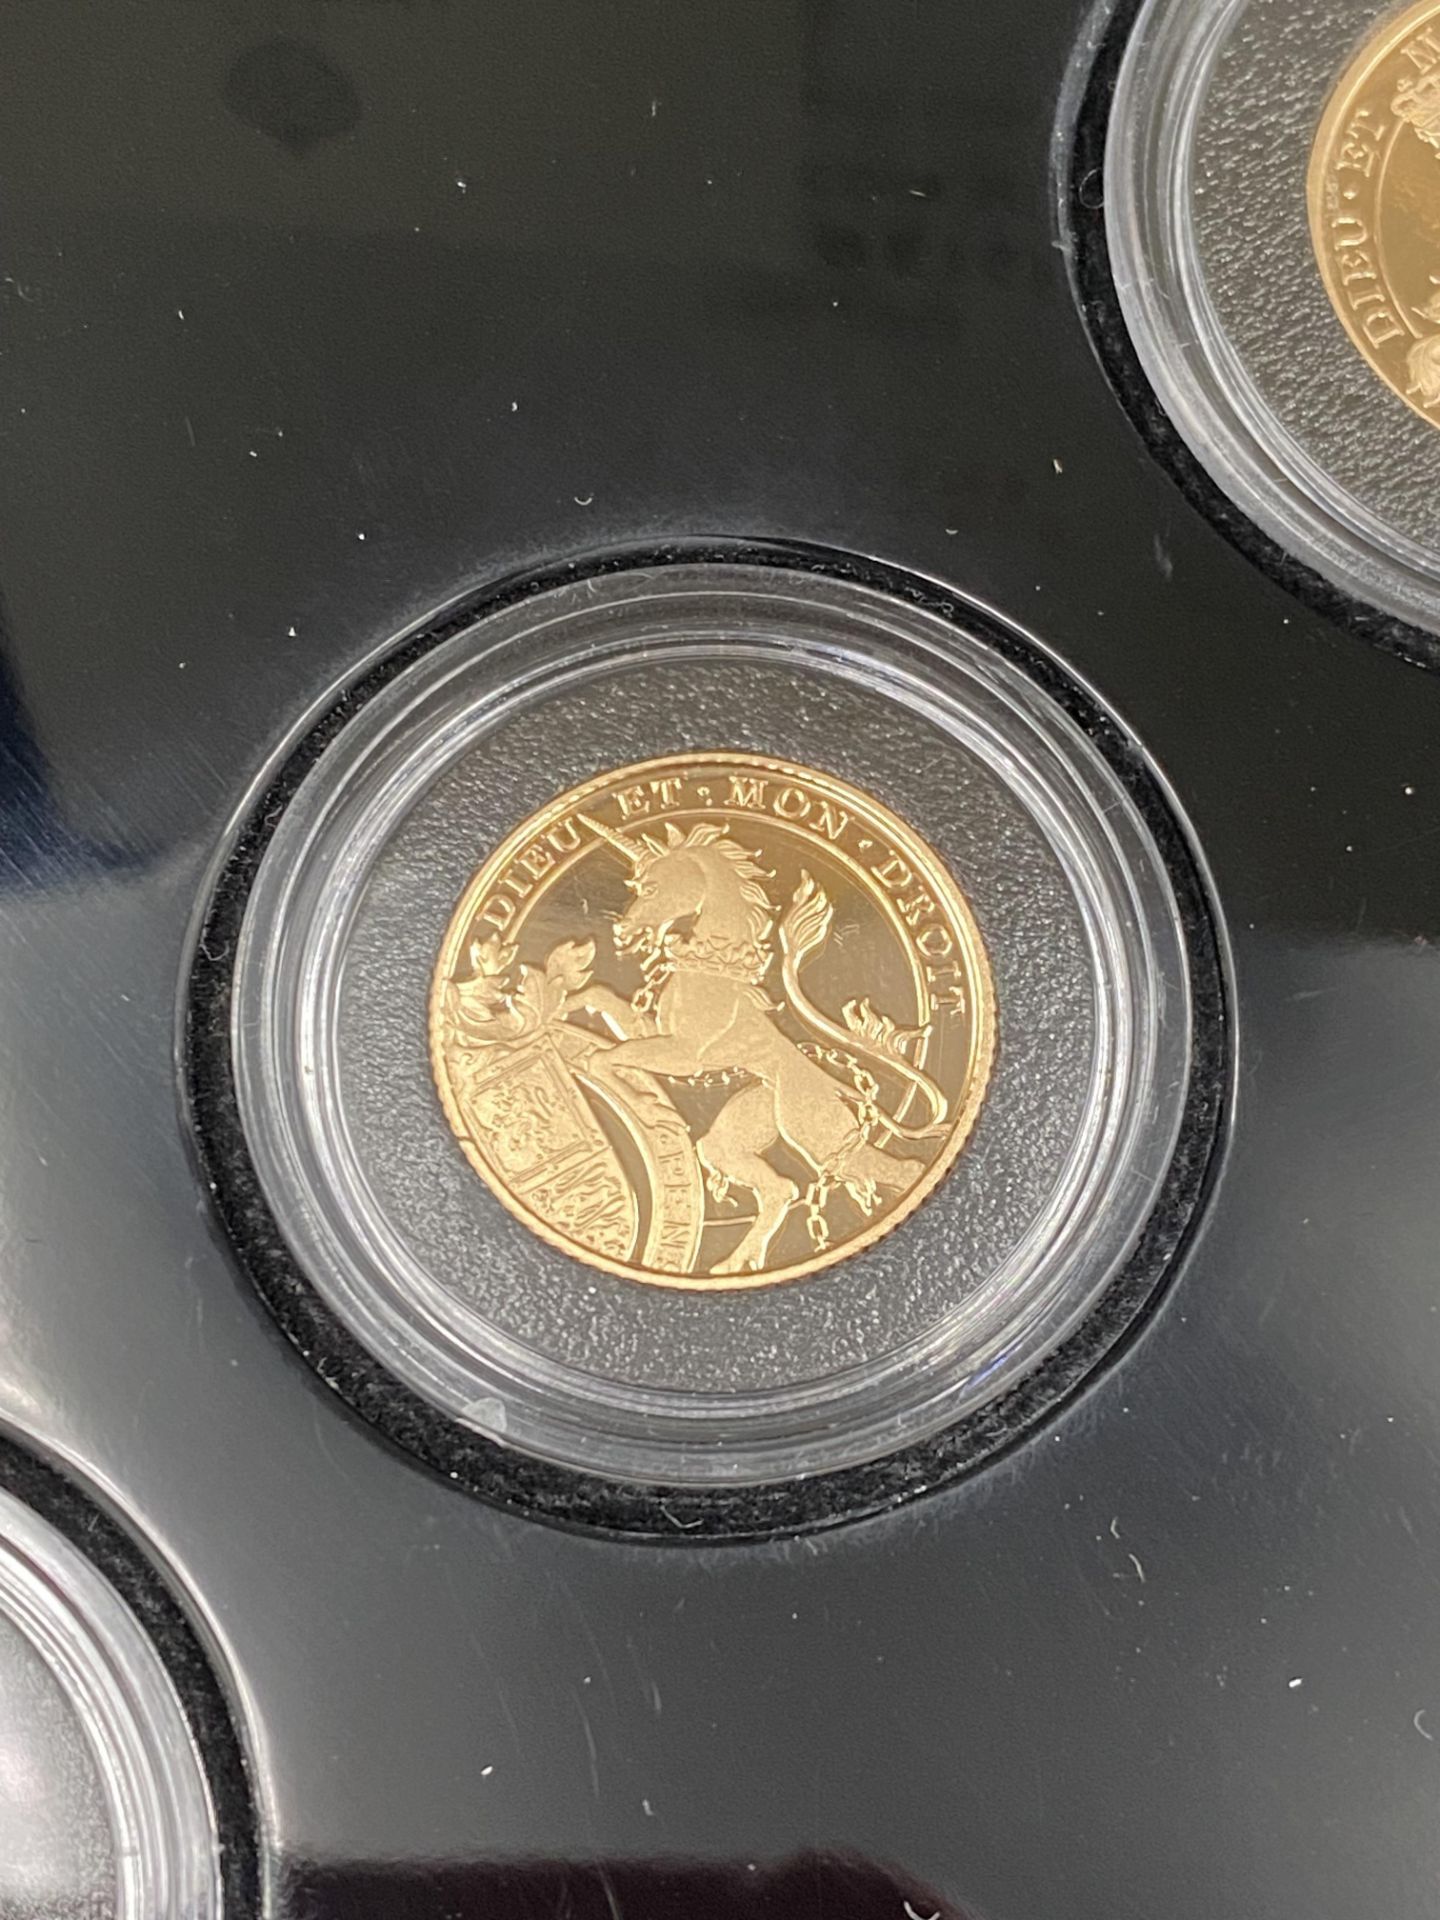 East India Company for St. Helena 2022 limited edition sovereign three coin set - Image 3 of 7